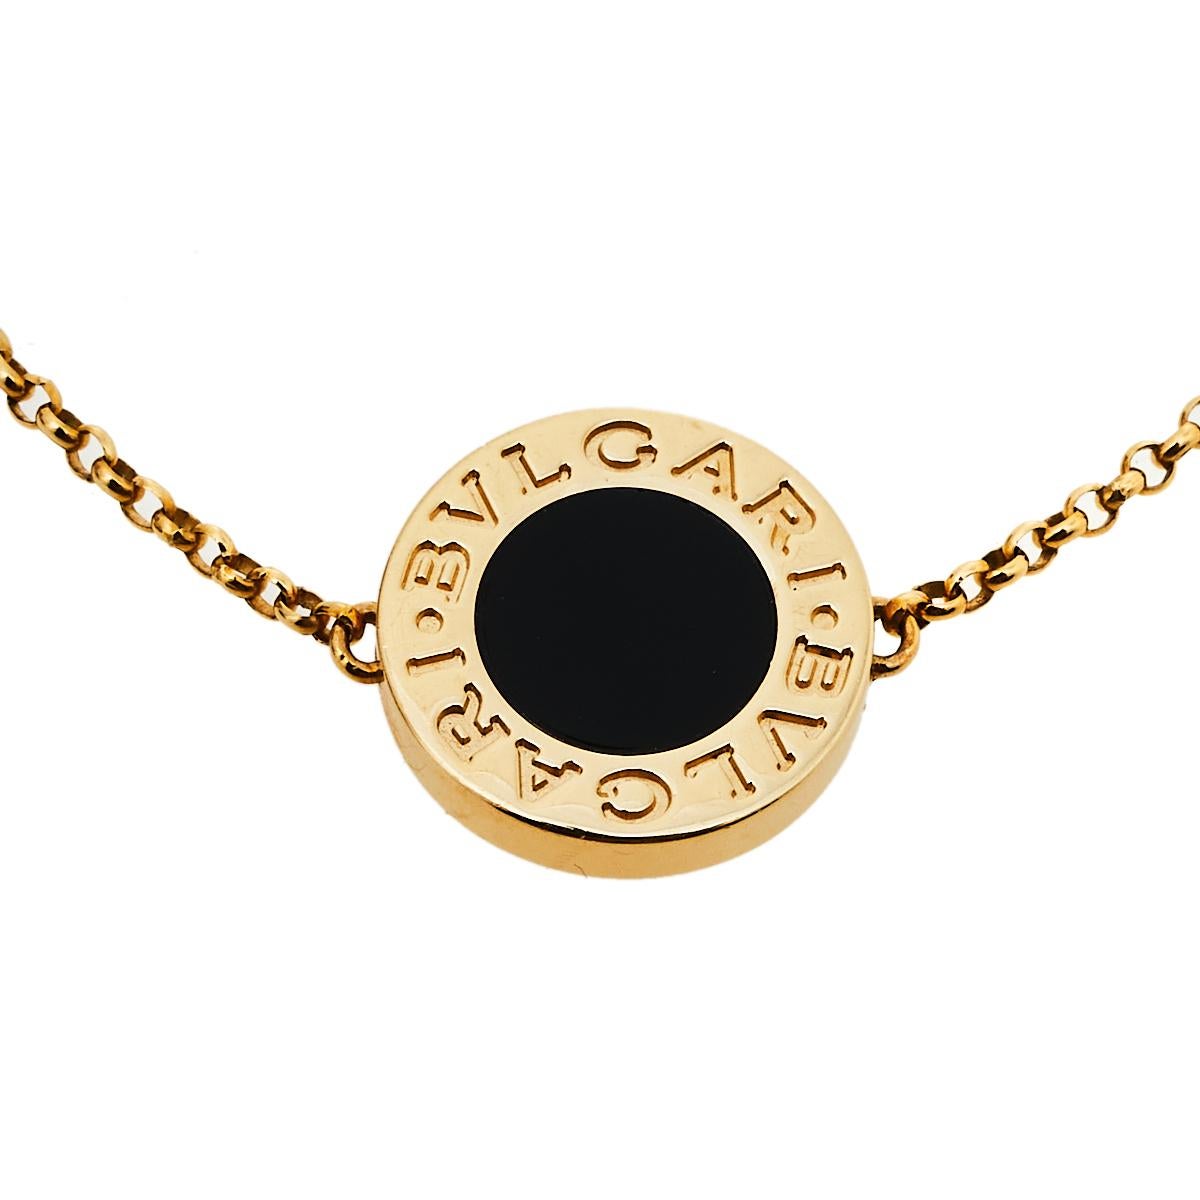 This Bvlgari bracelet is a smart accessory to have in your jewelry collection. It features an iconic Bvlgari coin charm crafted from 18K yellow gold inlaid with a black onyx center and engraved with BVLGARI-BVLGARI. The charm is strung on a gold